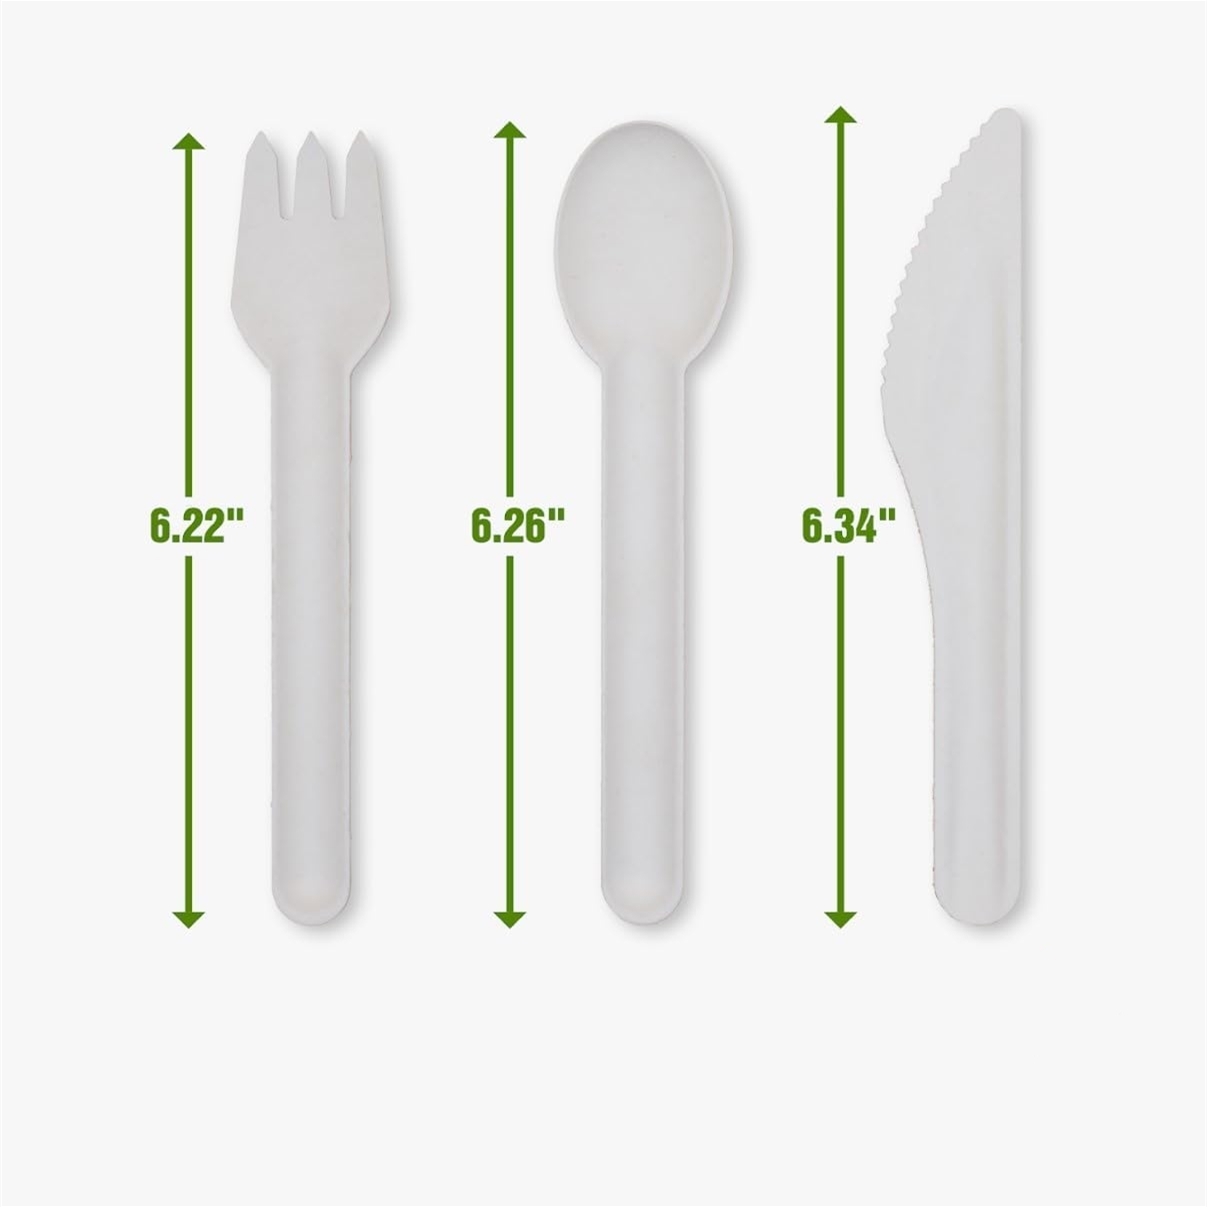 Compostable Spoons Knives Forks Cutlery Set BPI Certified Disposable Paper Utensils 50 Pack Heavy Duty Biodegradable Eco-Friendly Made of Bagasse